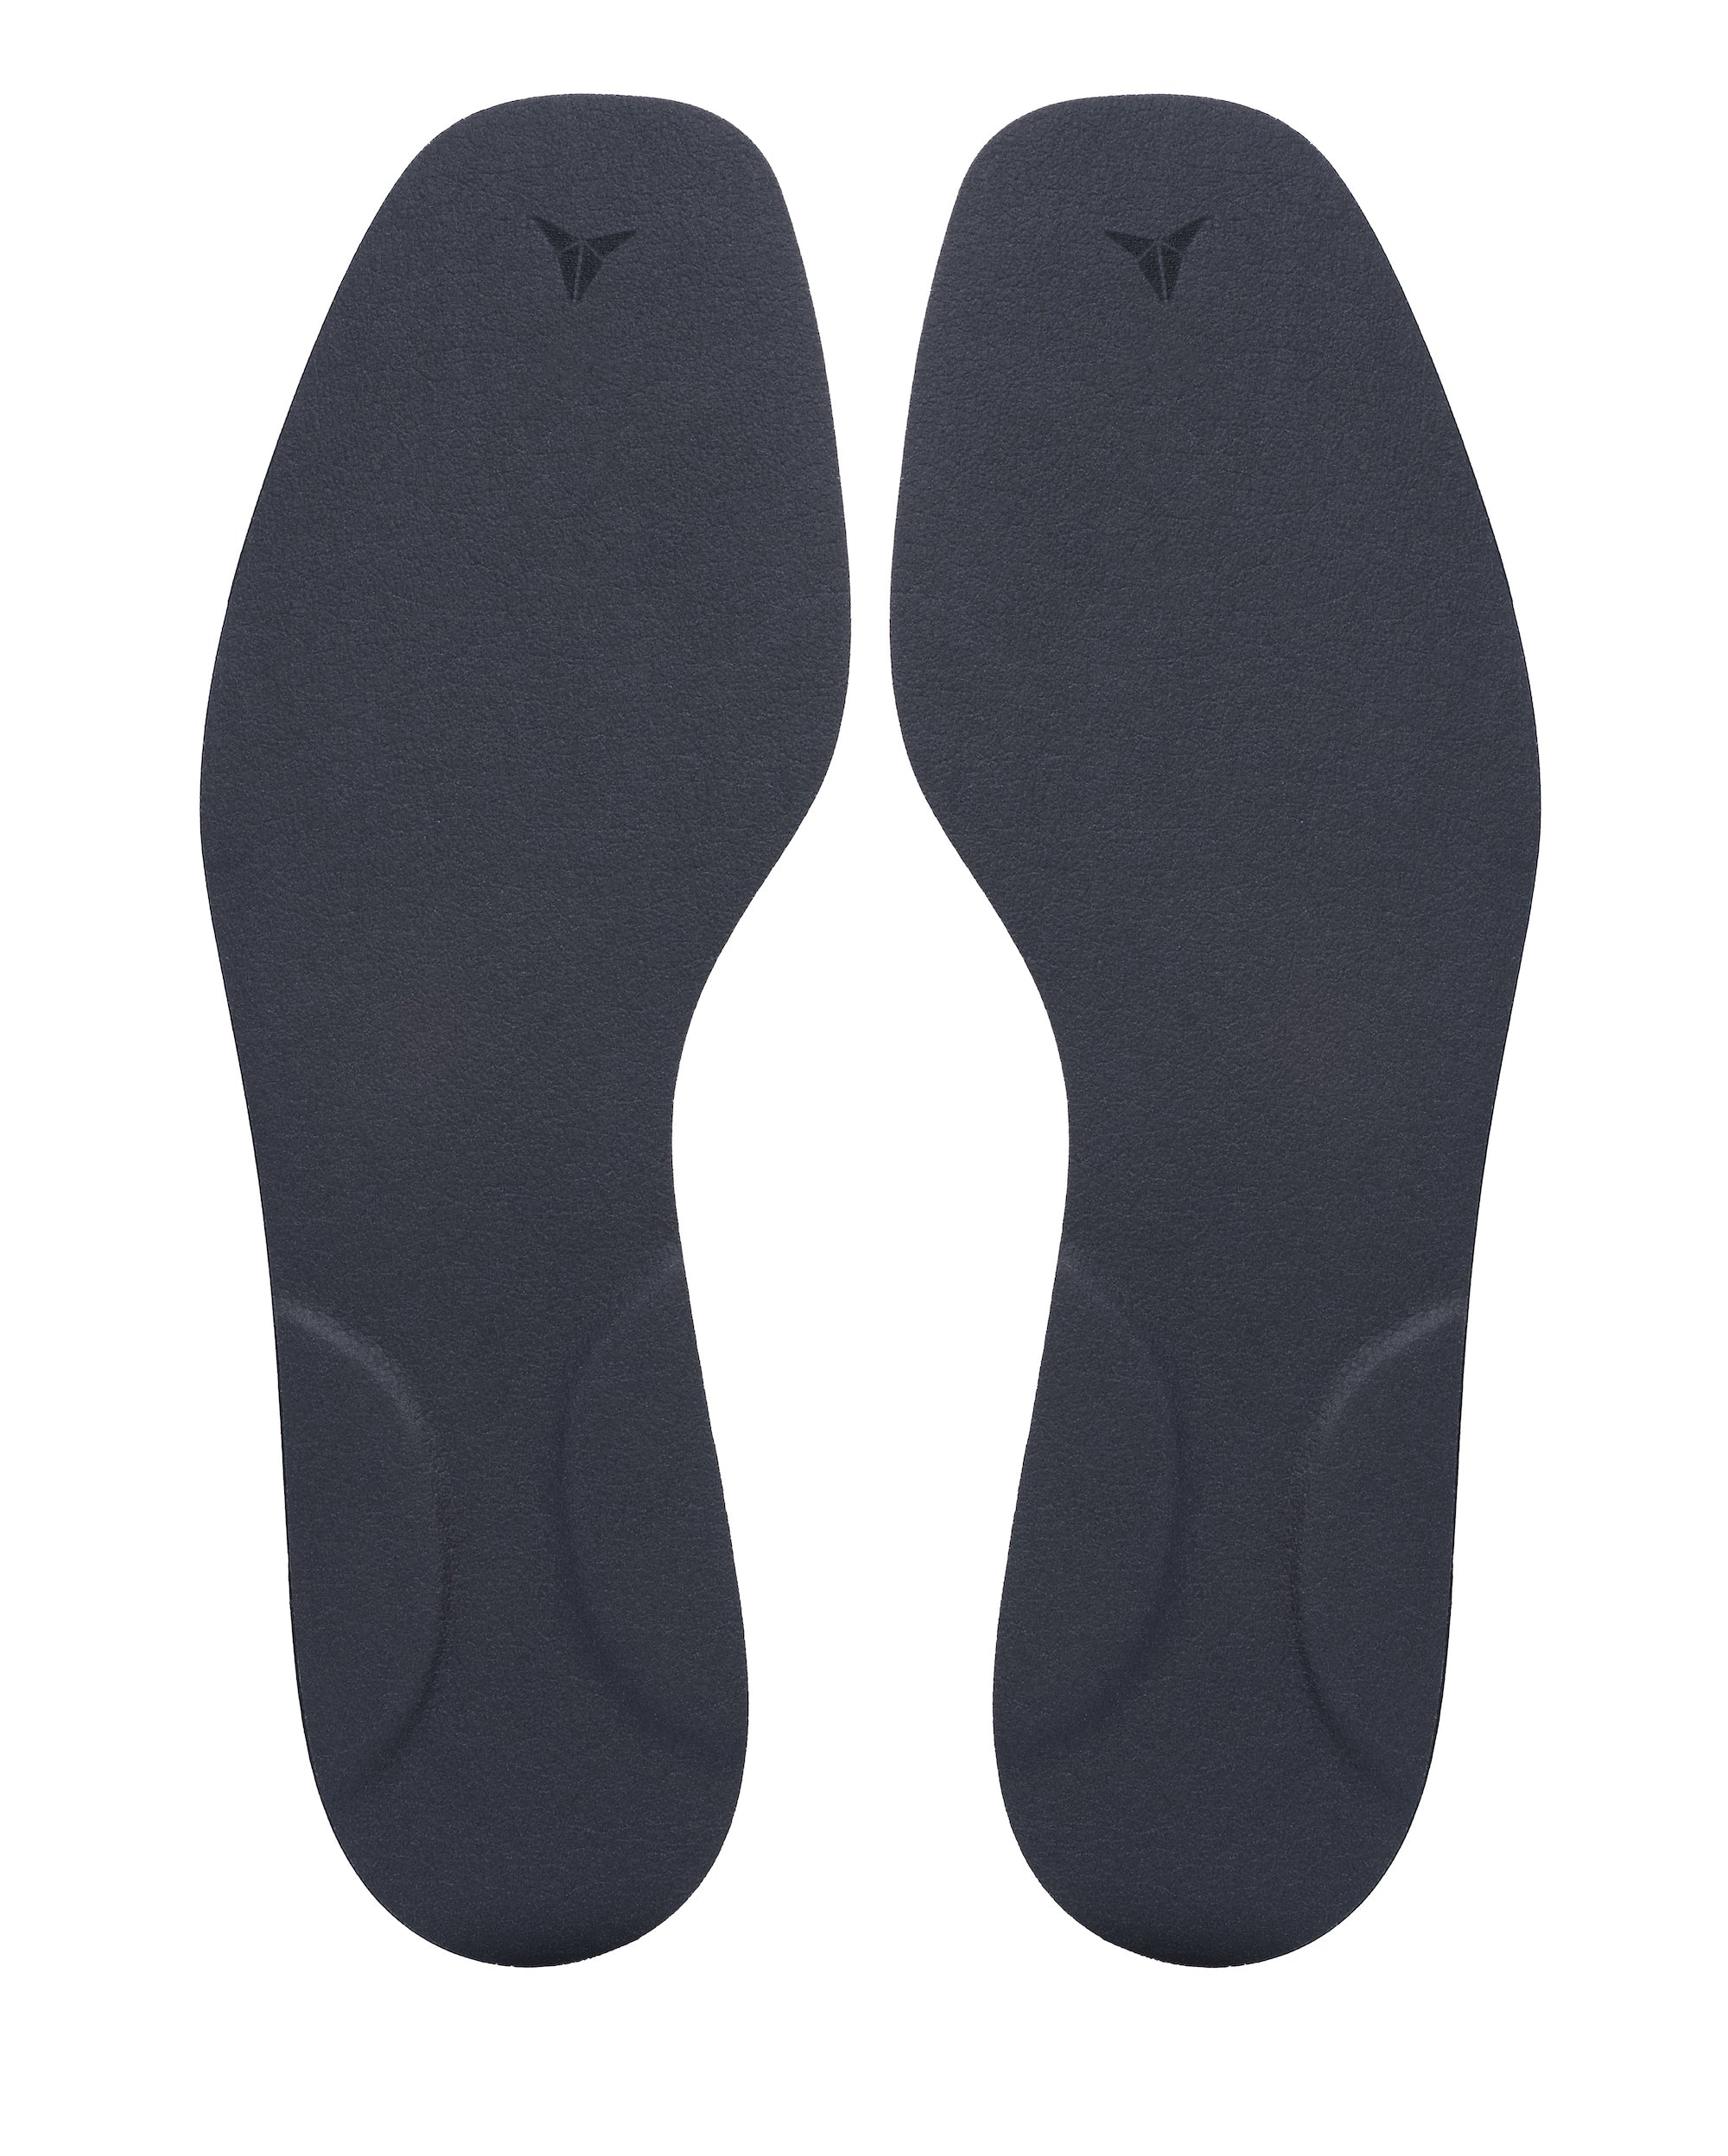 Avoid sway back, flat back, back muscle strain and lumbar strain with Posturepro's insoles.